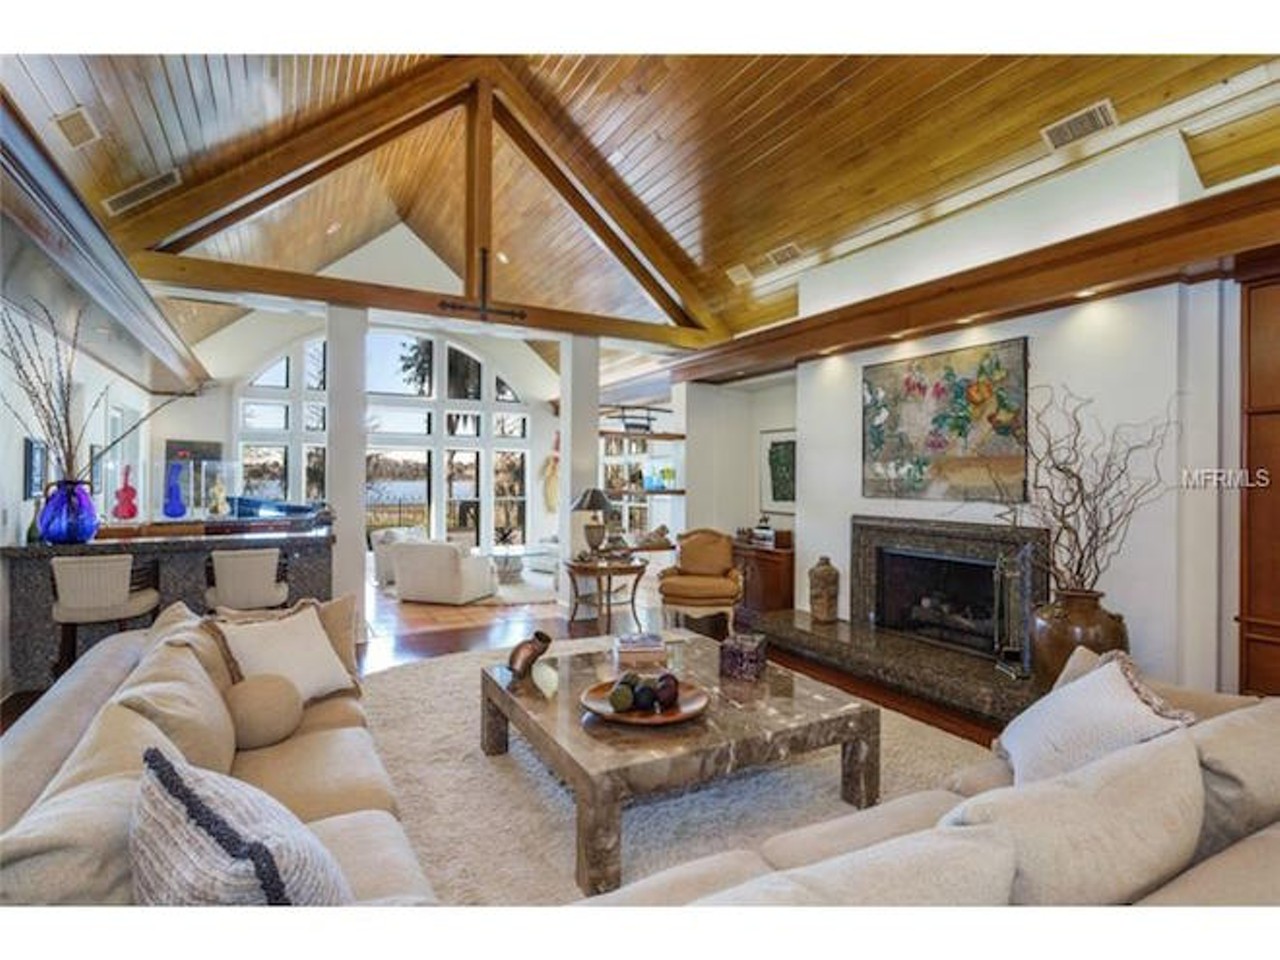 Vaulted ceilings and "oversized living spaces."